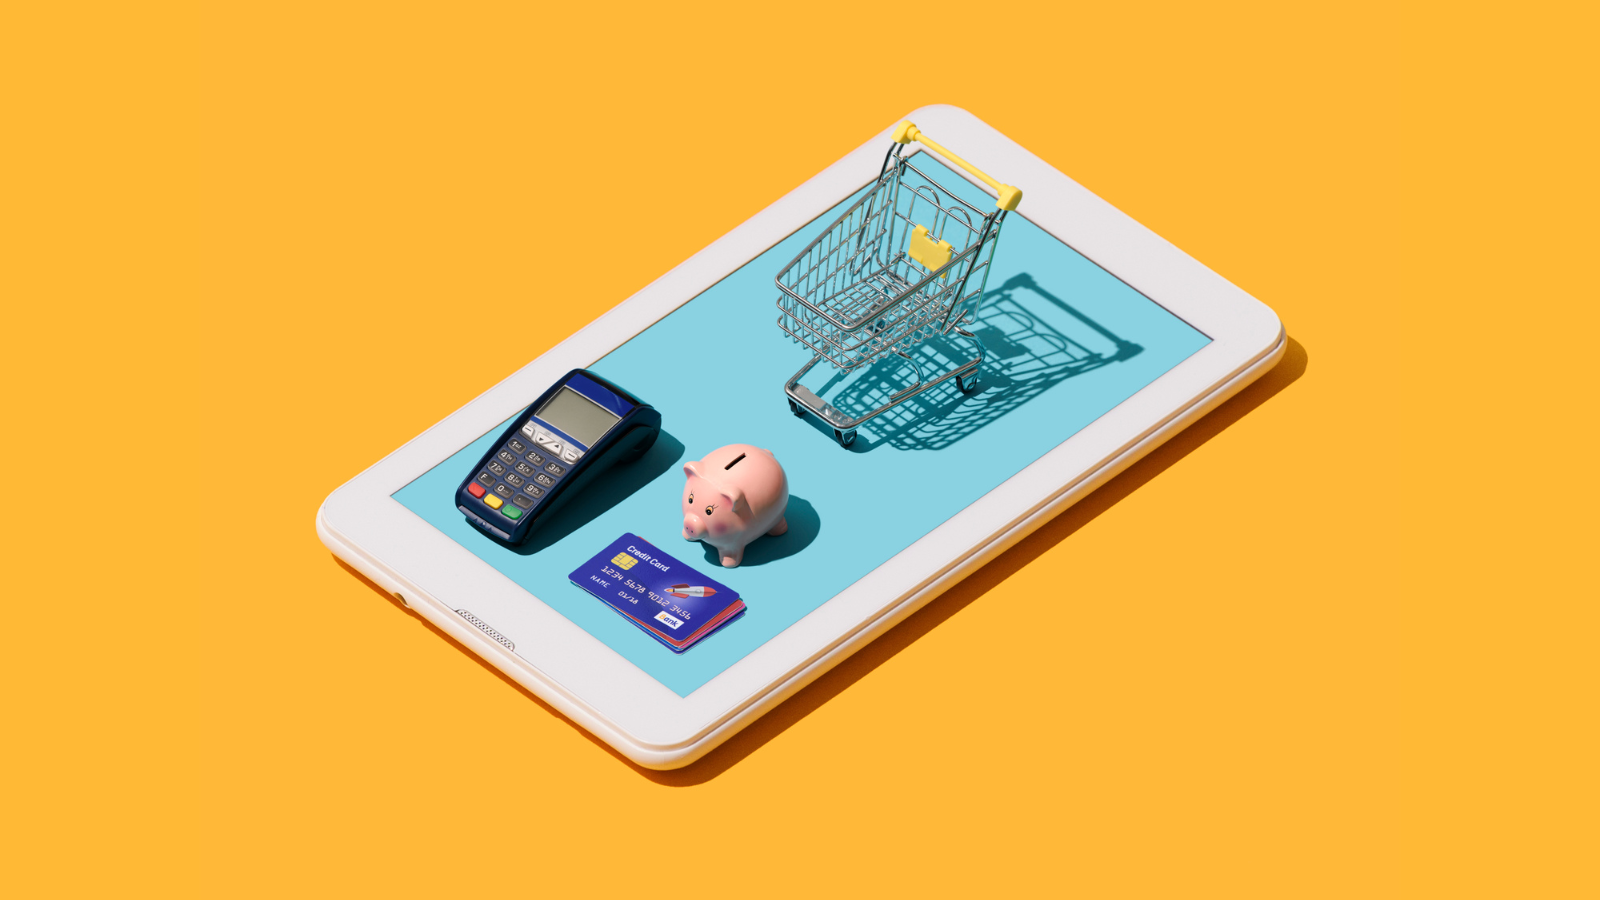 an ipad with min shopping cart, credit card, credit card machine and piggy bank on it. There is a yellow background. 